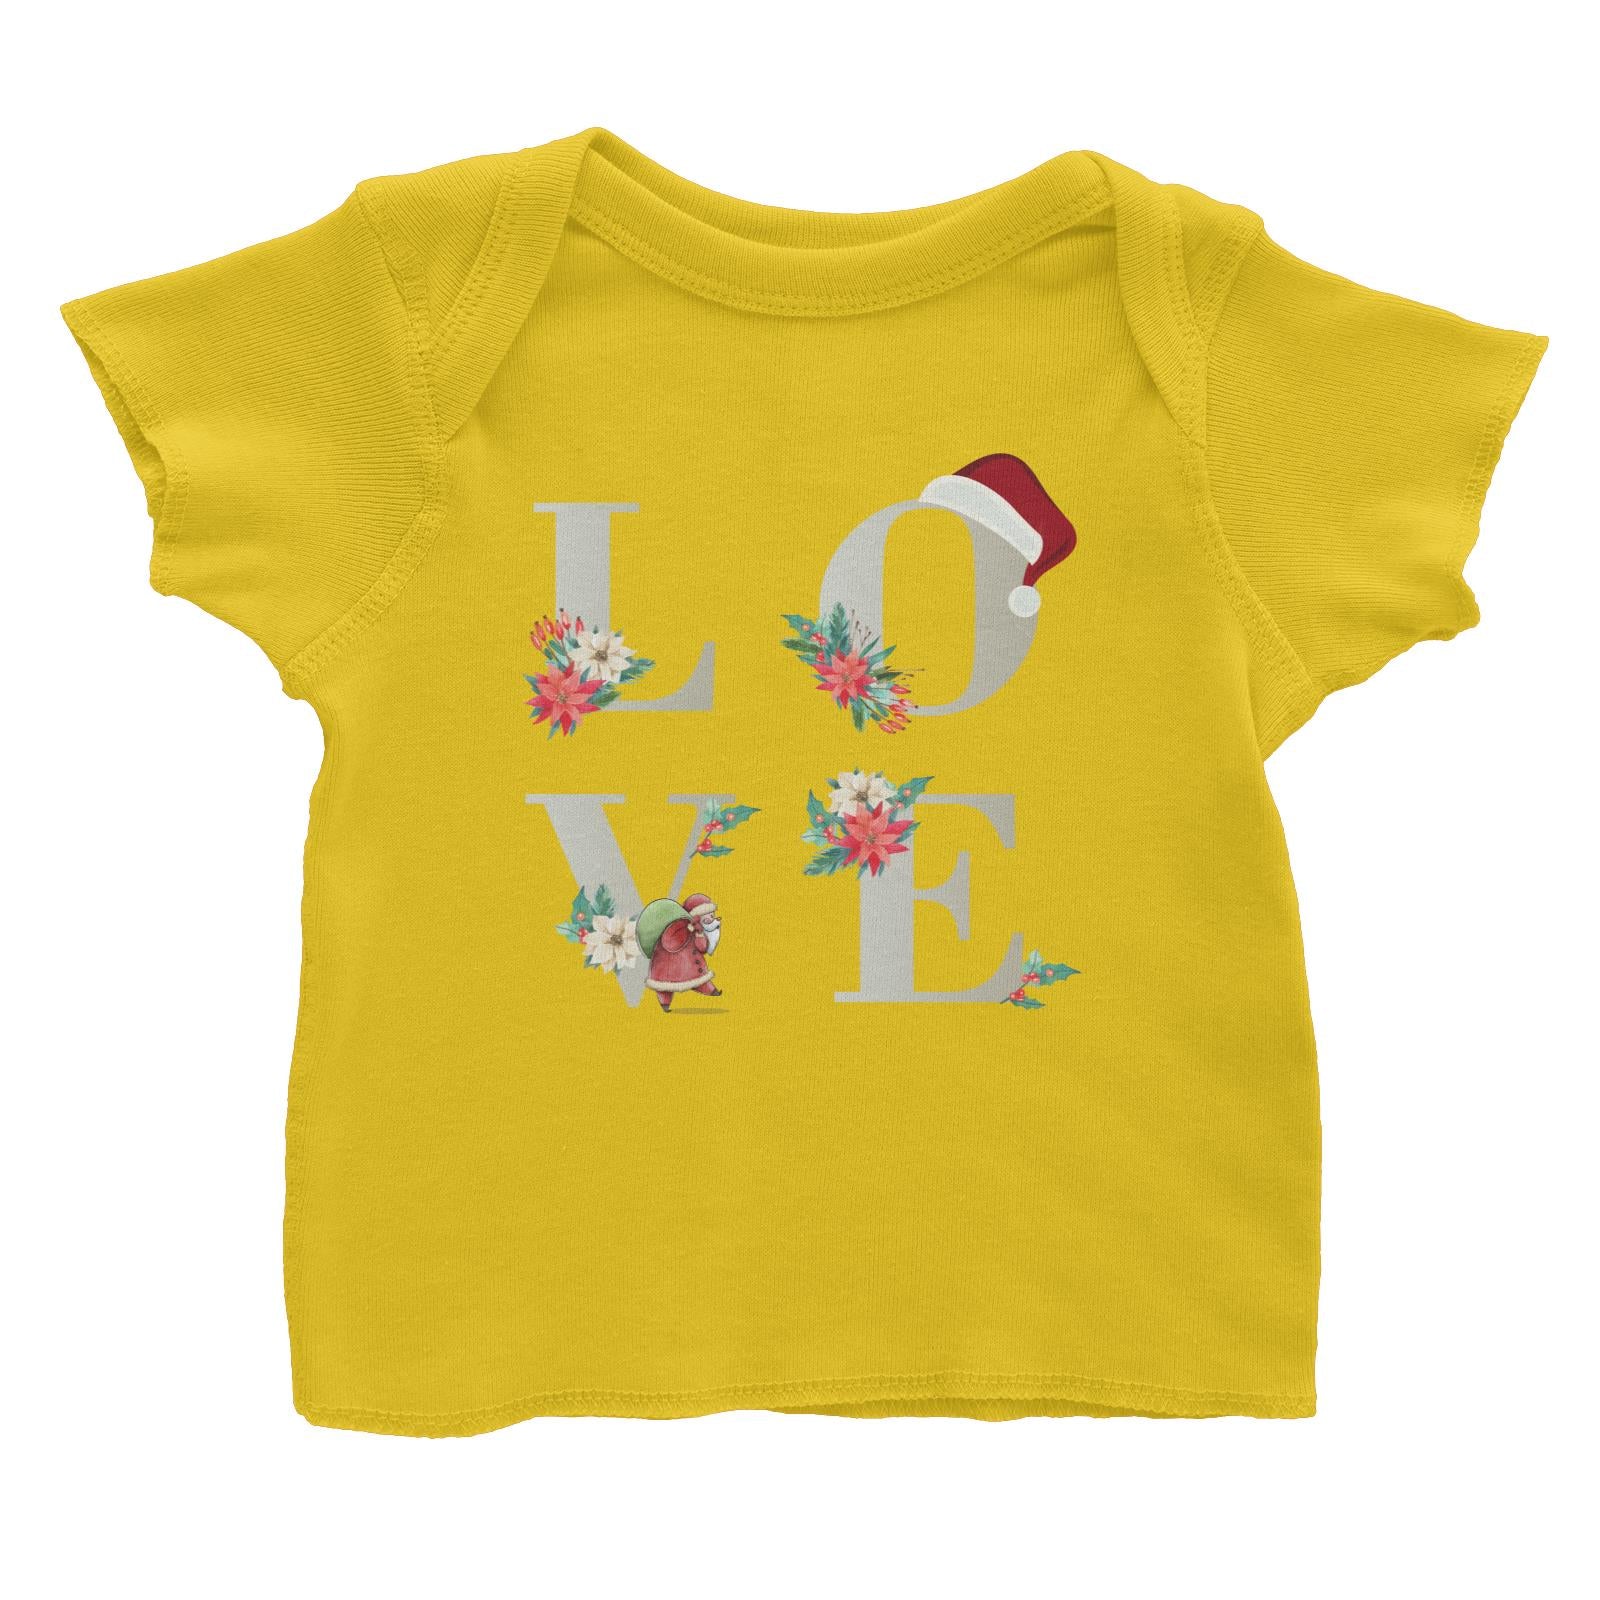 LOVE with Christmas Elements Baby T-Shirt